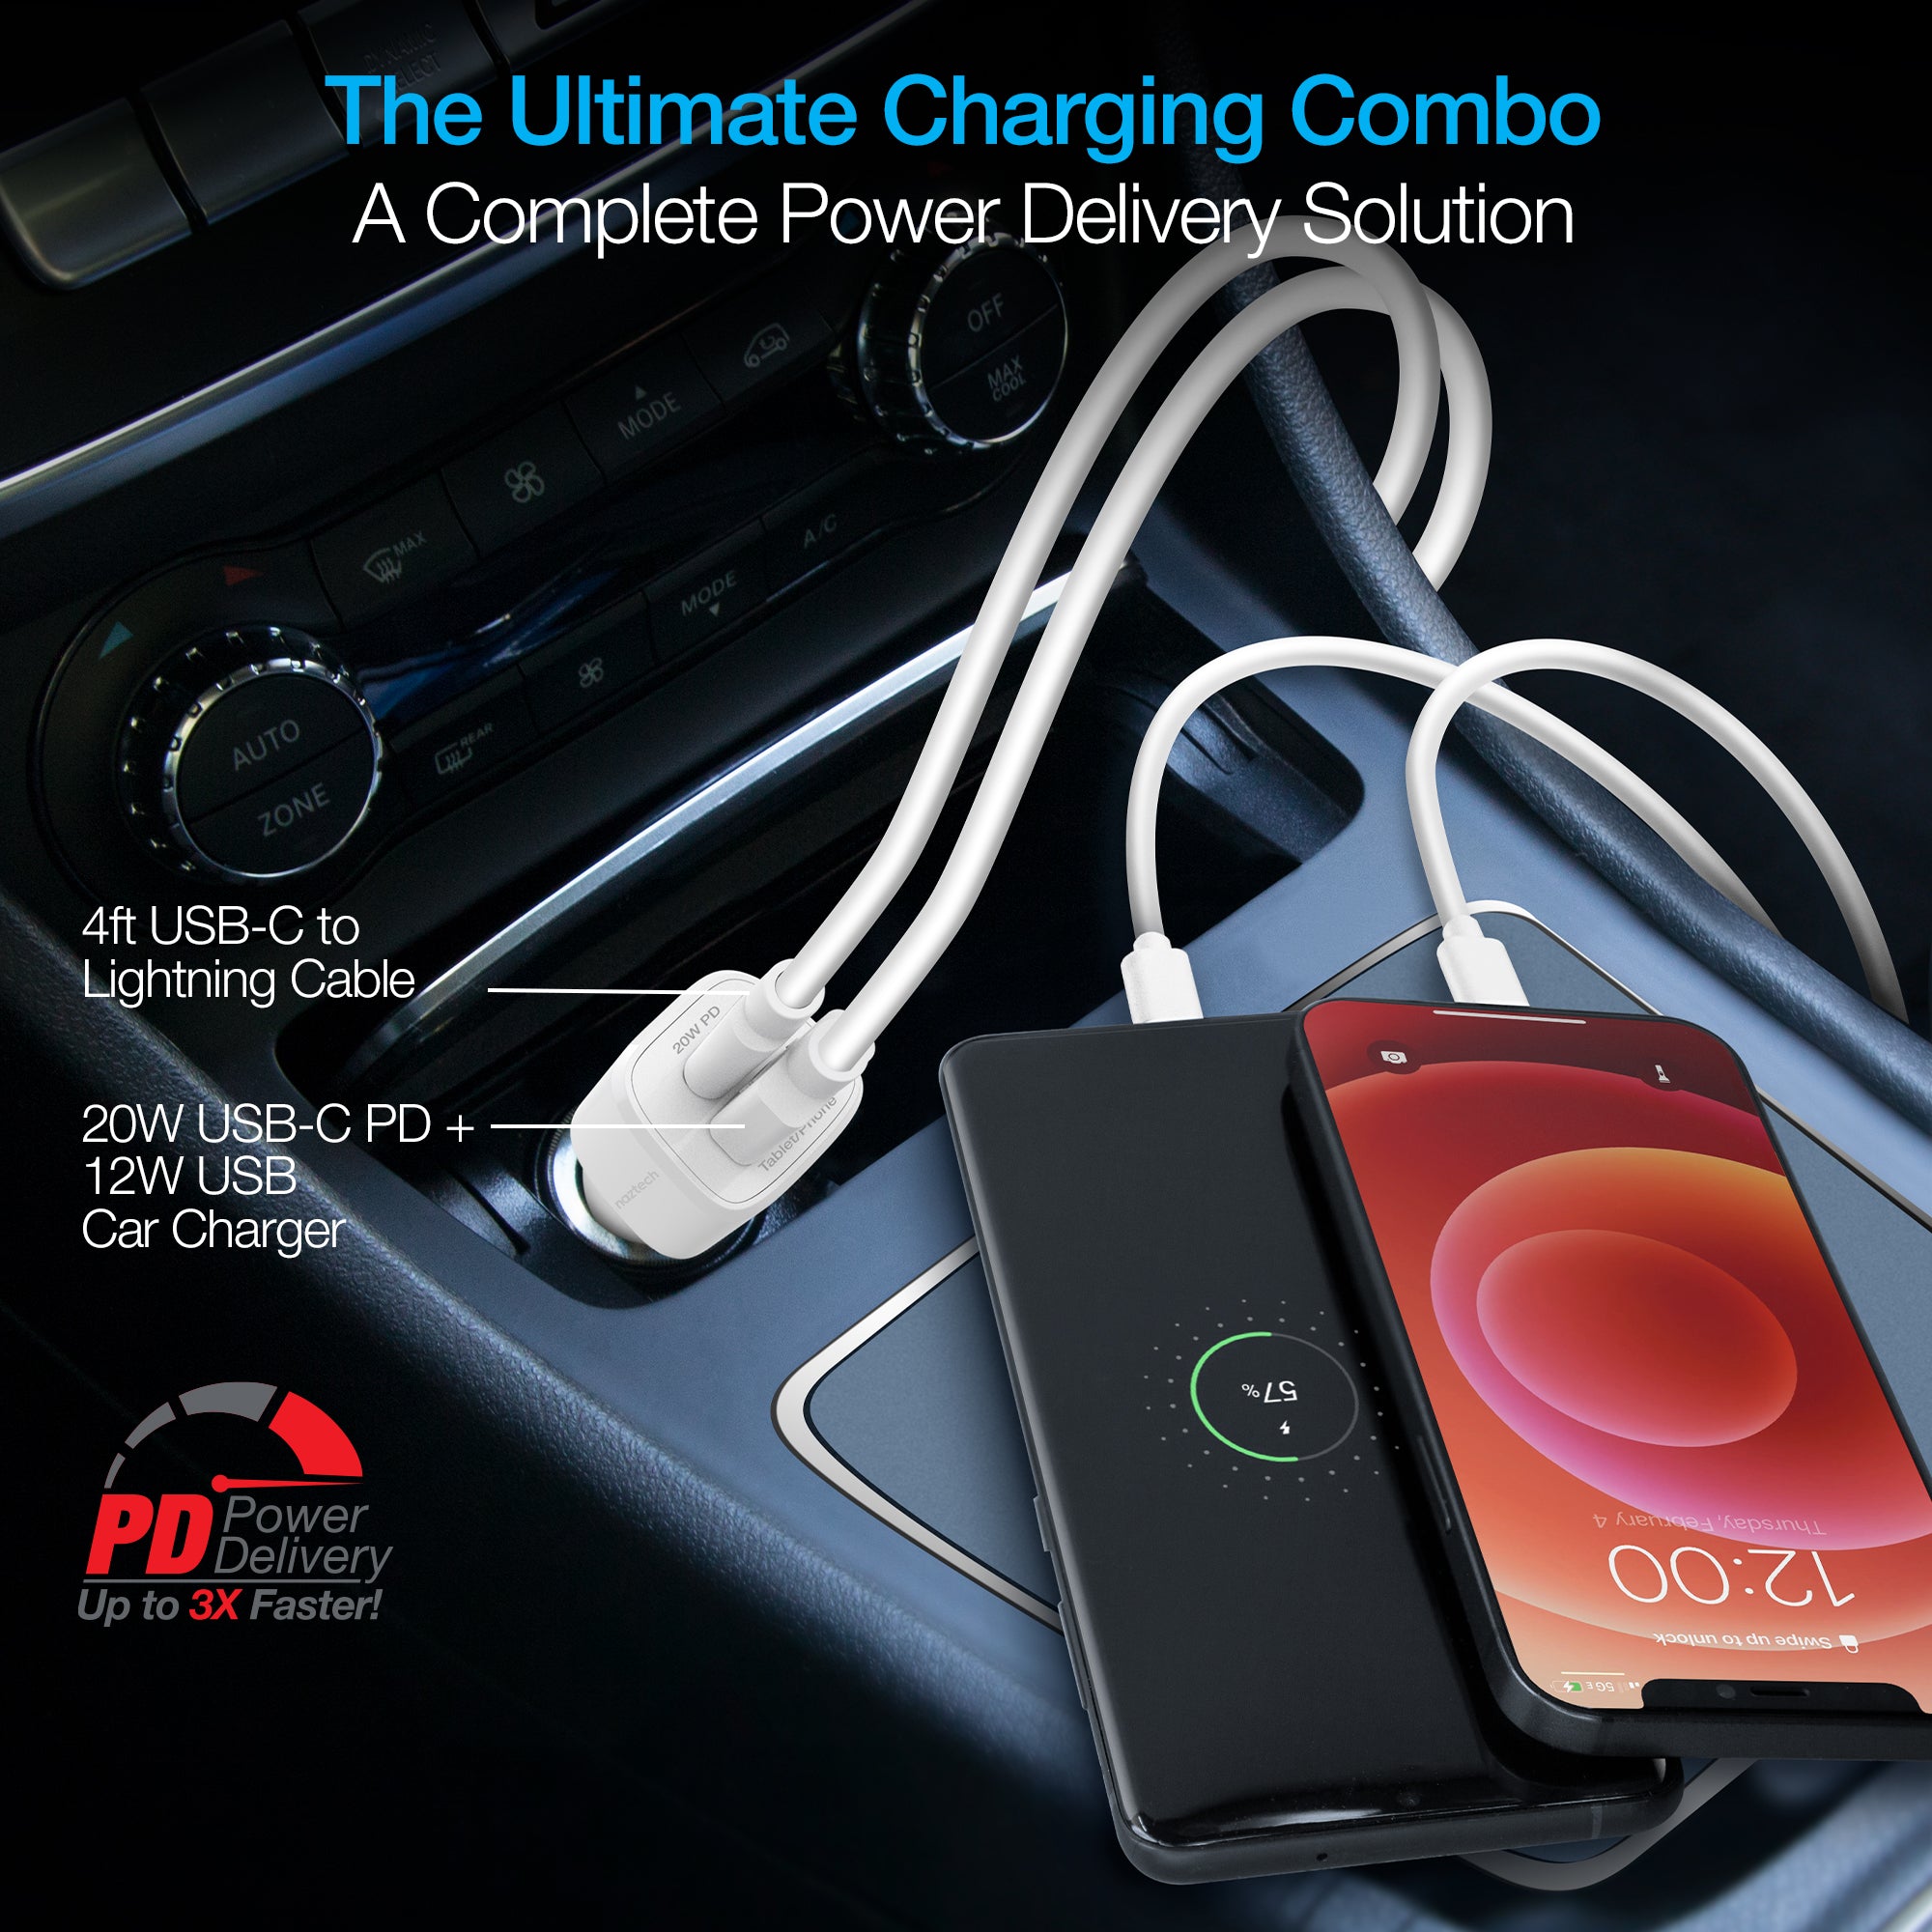 20W USB-C PD + 12W USB Fast Car Charger with USB-C to Lightning Cable